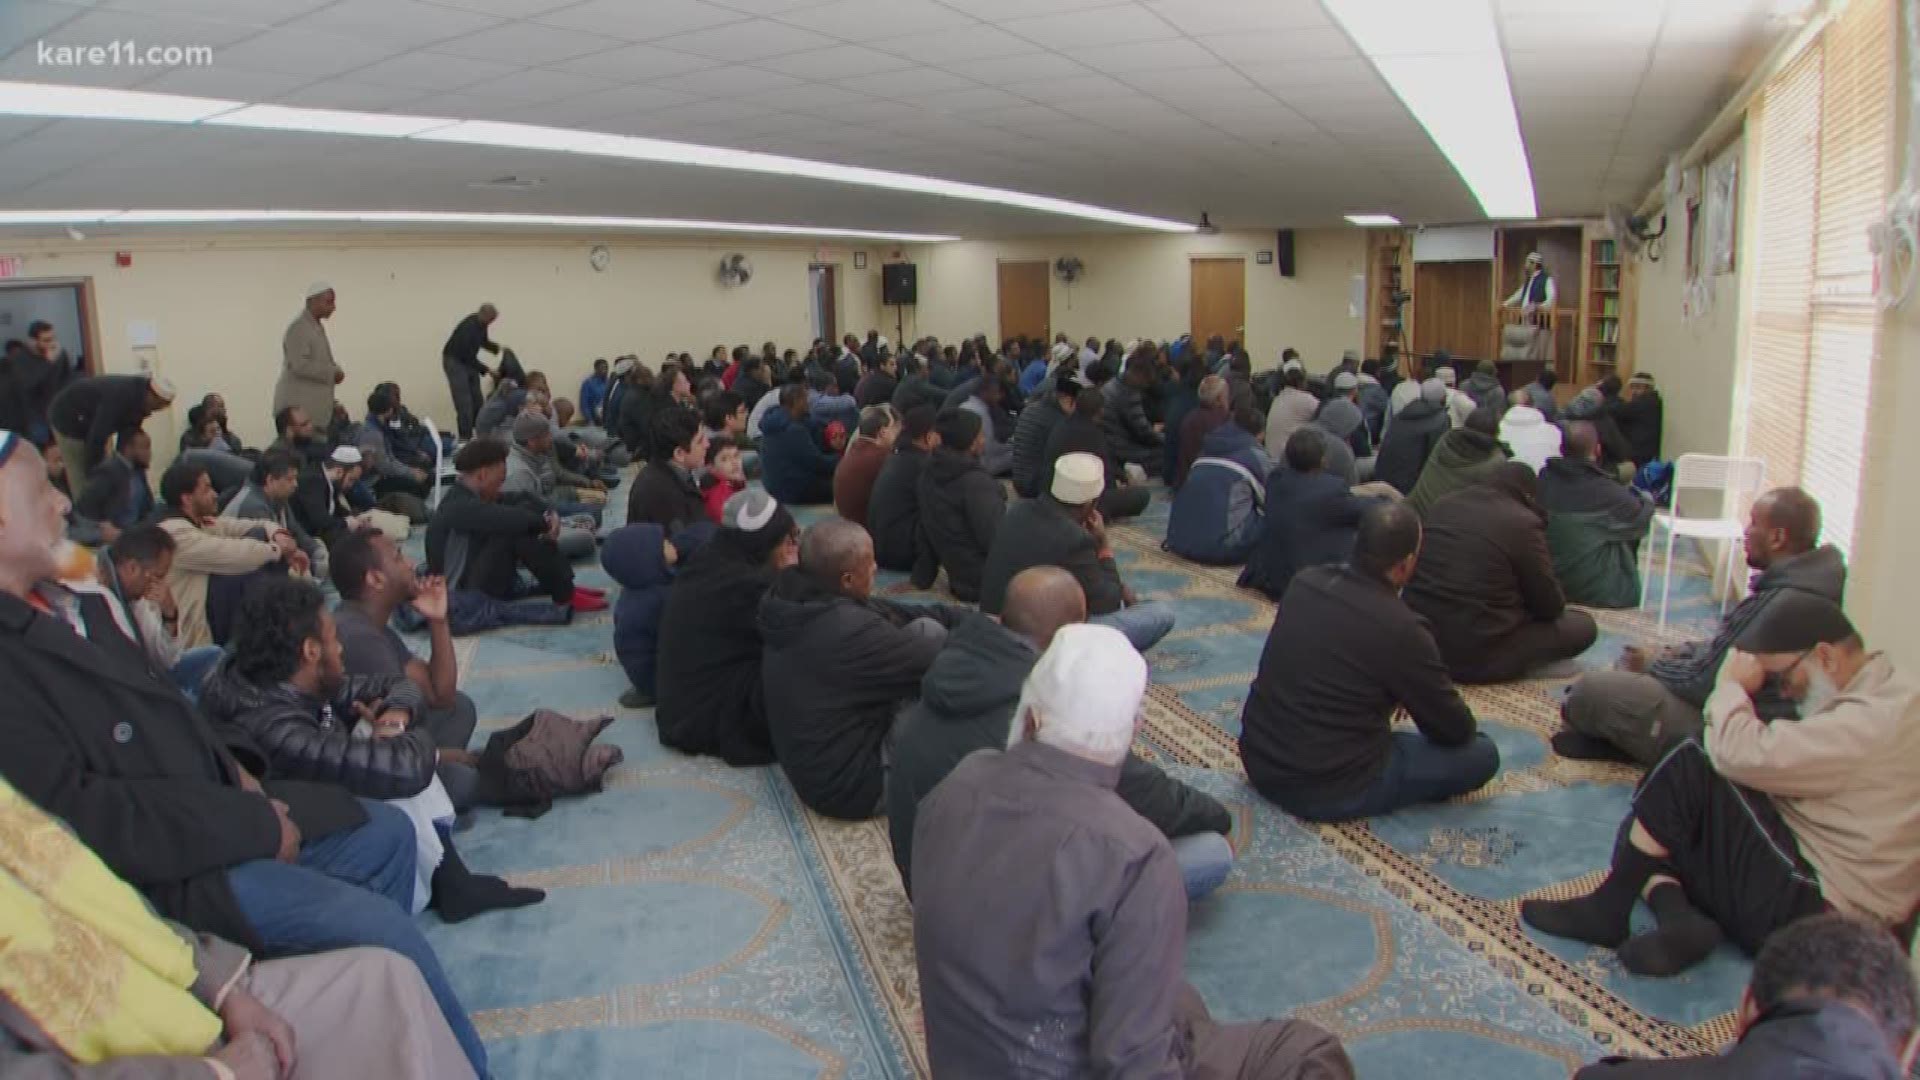 St. Paul and Minneapolis police departments say they're upping security at local mosques, as the community responds to yesterday's attacks in New Zealand.